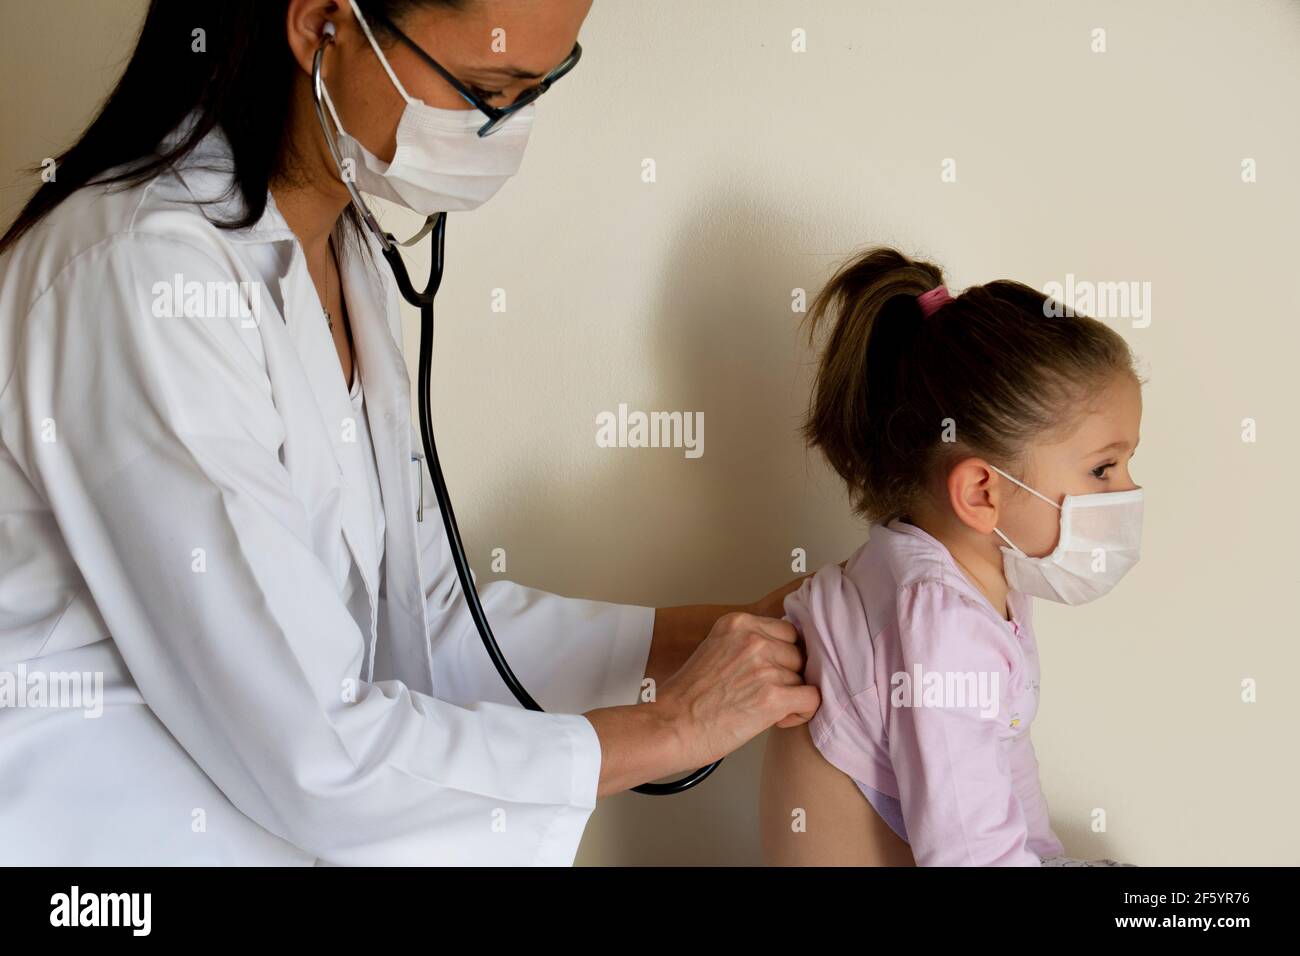 chubby little girl in pediatric examination by her doctor. the doctor listens to your lungs and heart. they wear protective face masks Stock Photo